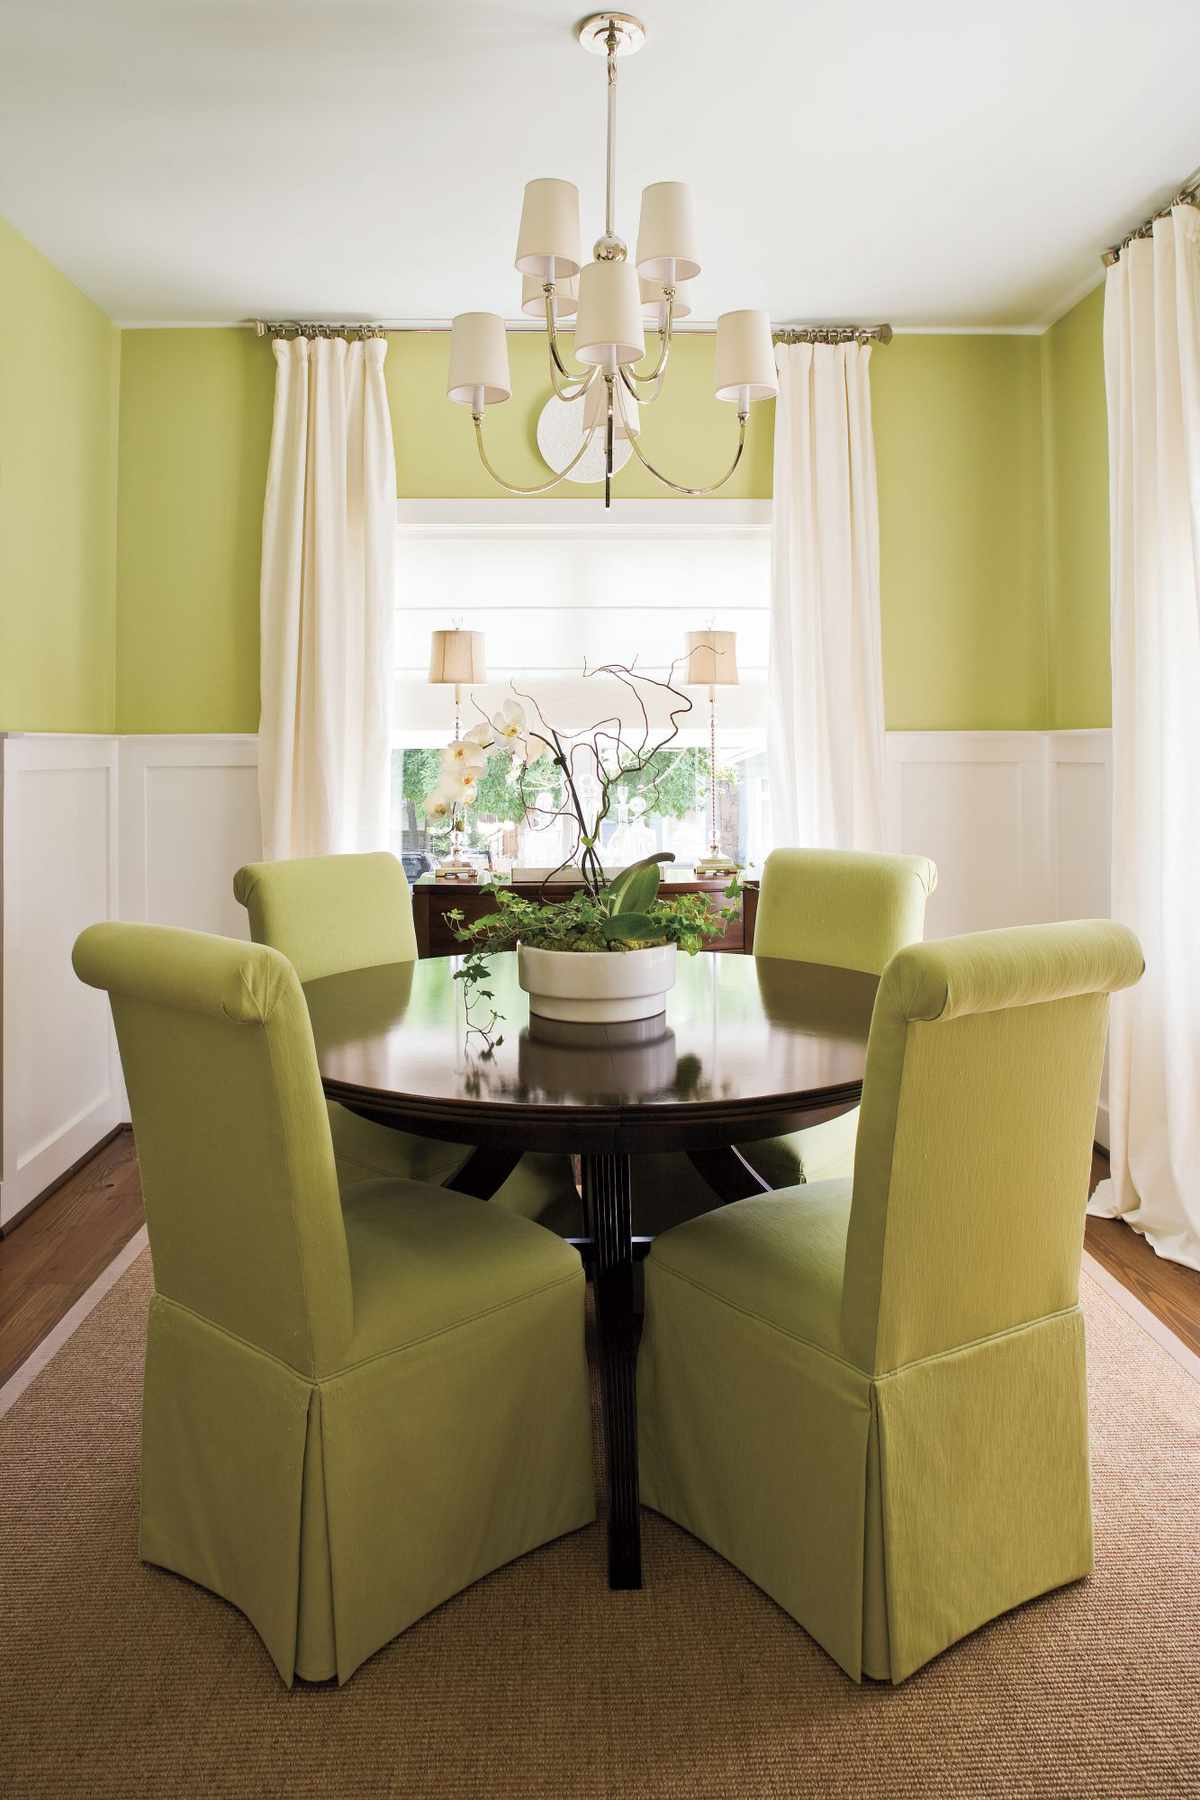 Make a Small Dining Room Look Larger